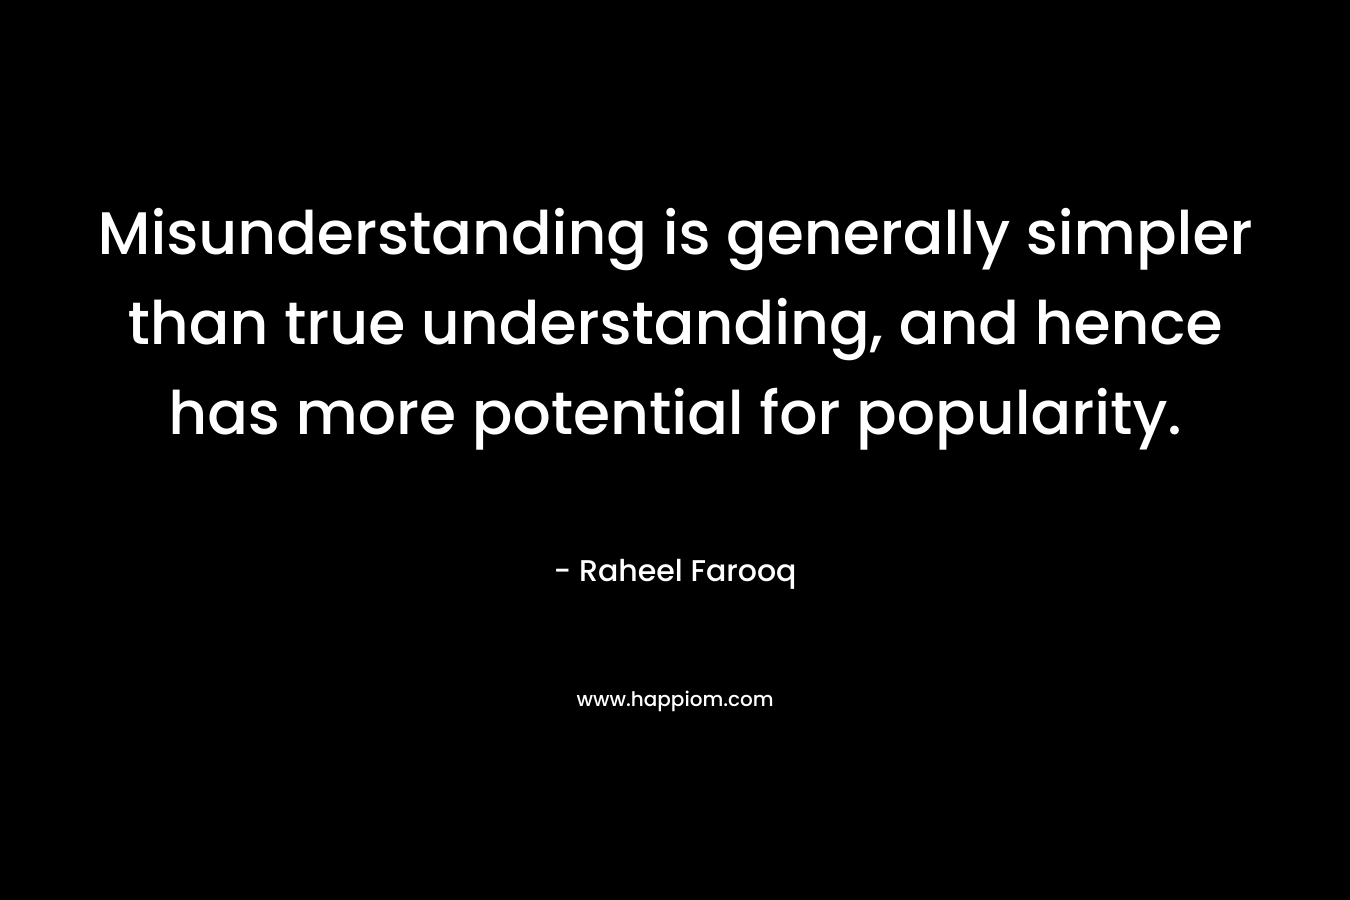 Misunderstanding is generally simpler than true understanding, and hence has more potential for popularity.